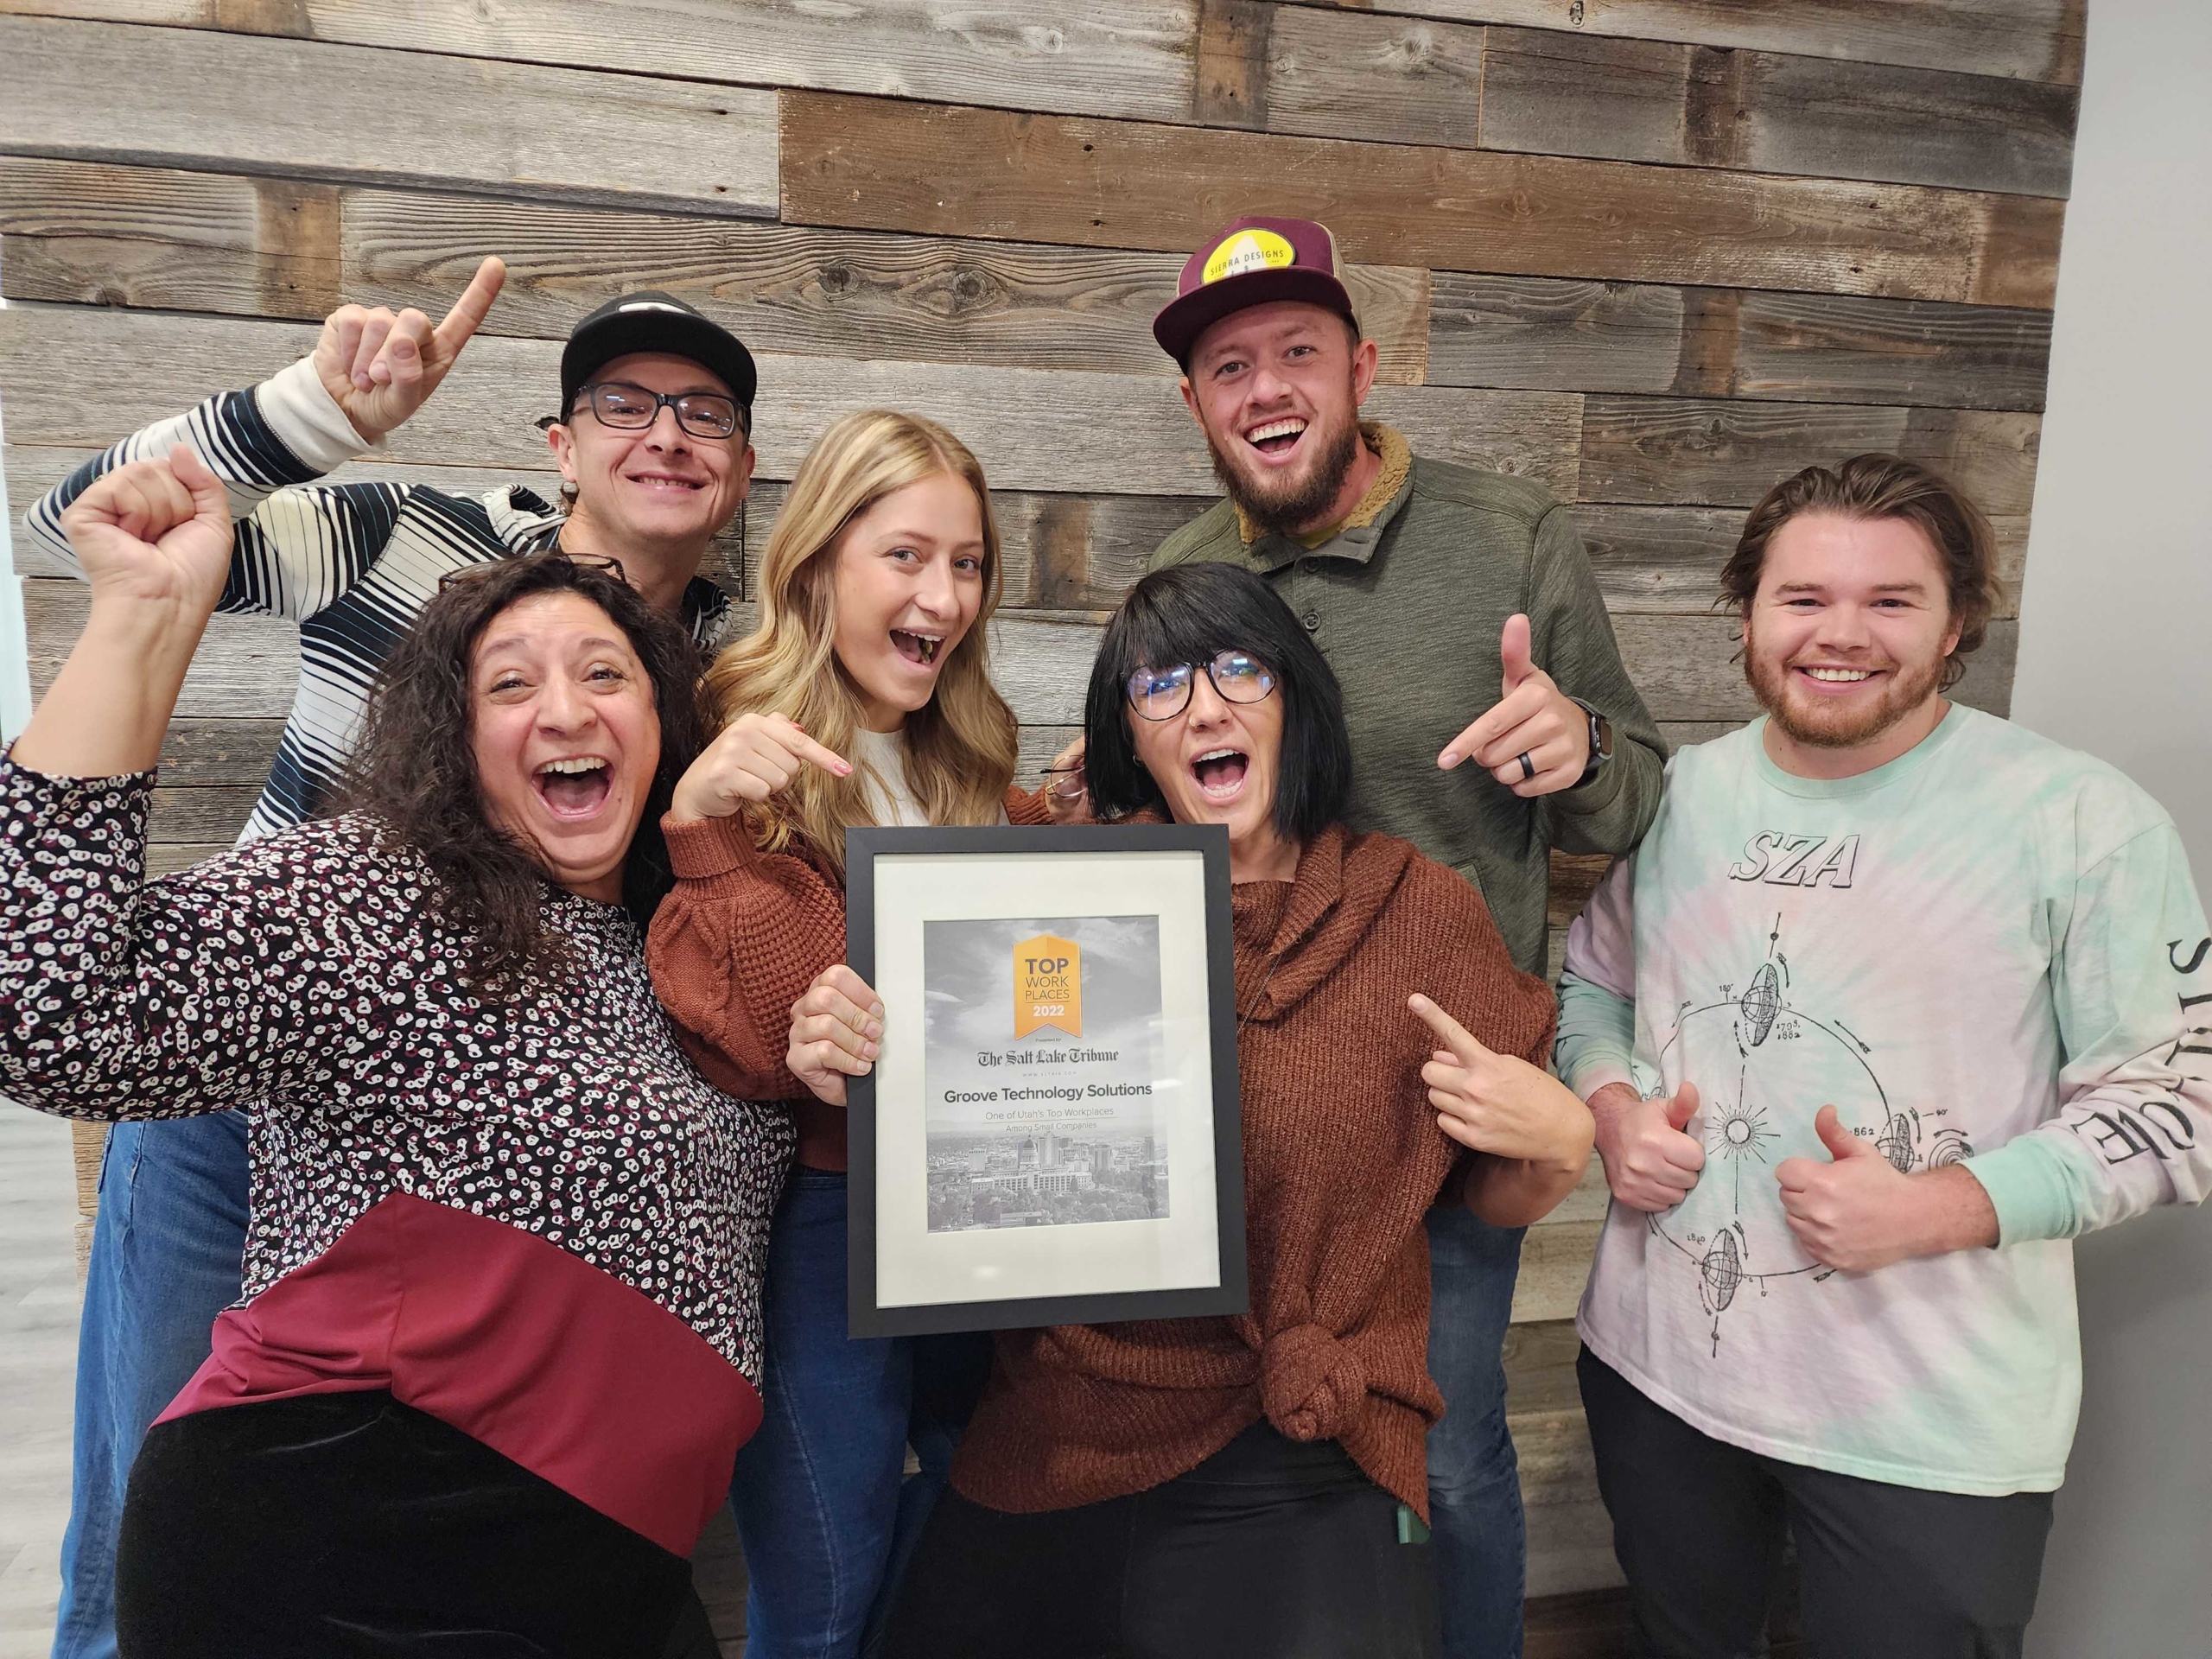 The Salt Lake Tribune Honors Groove Technology Solutions with 2022 Top Workplaces Award